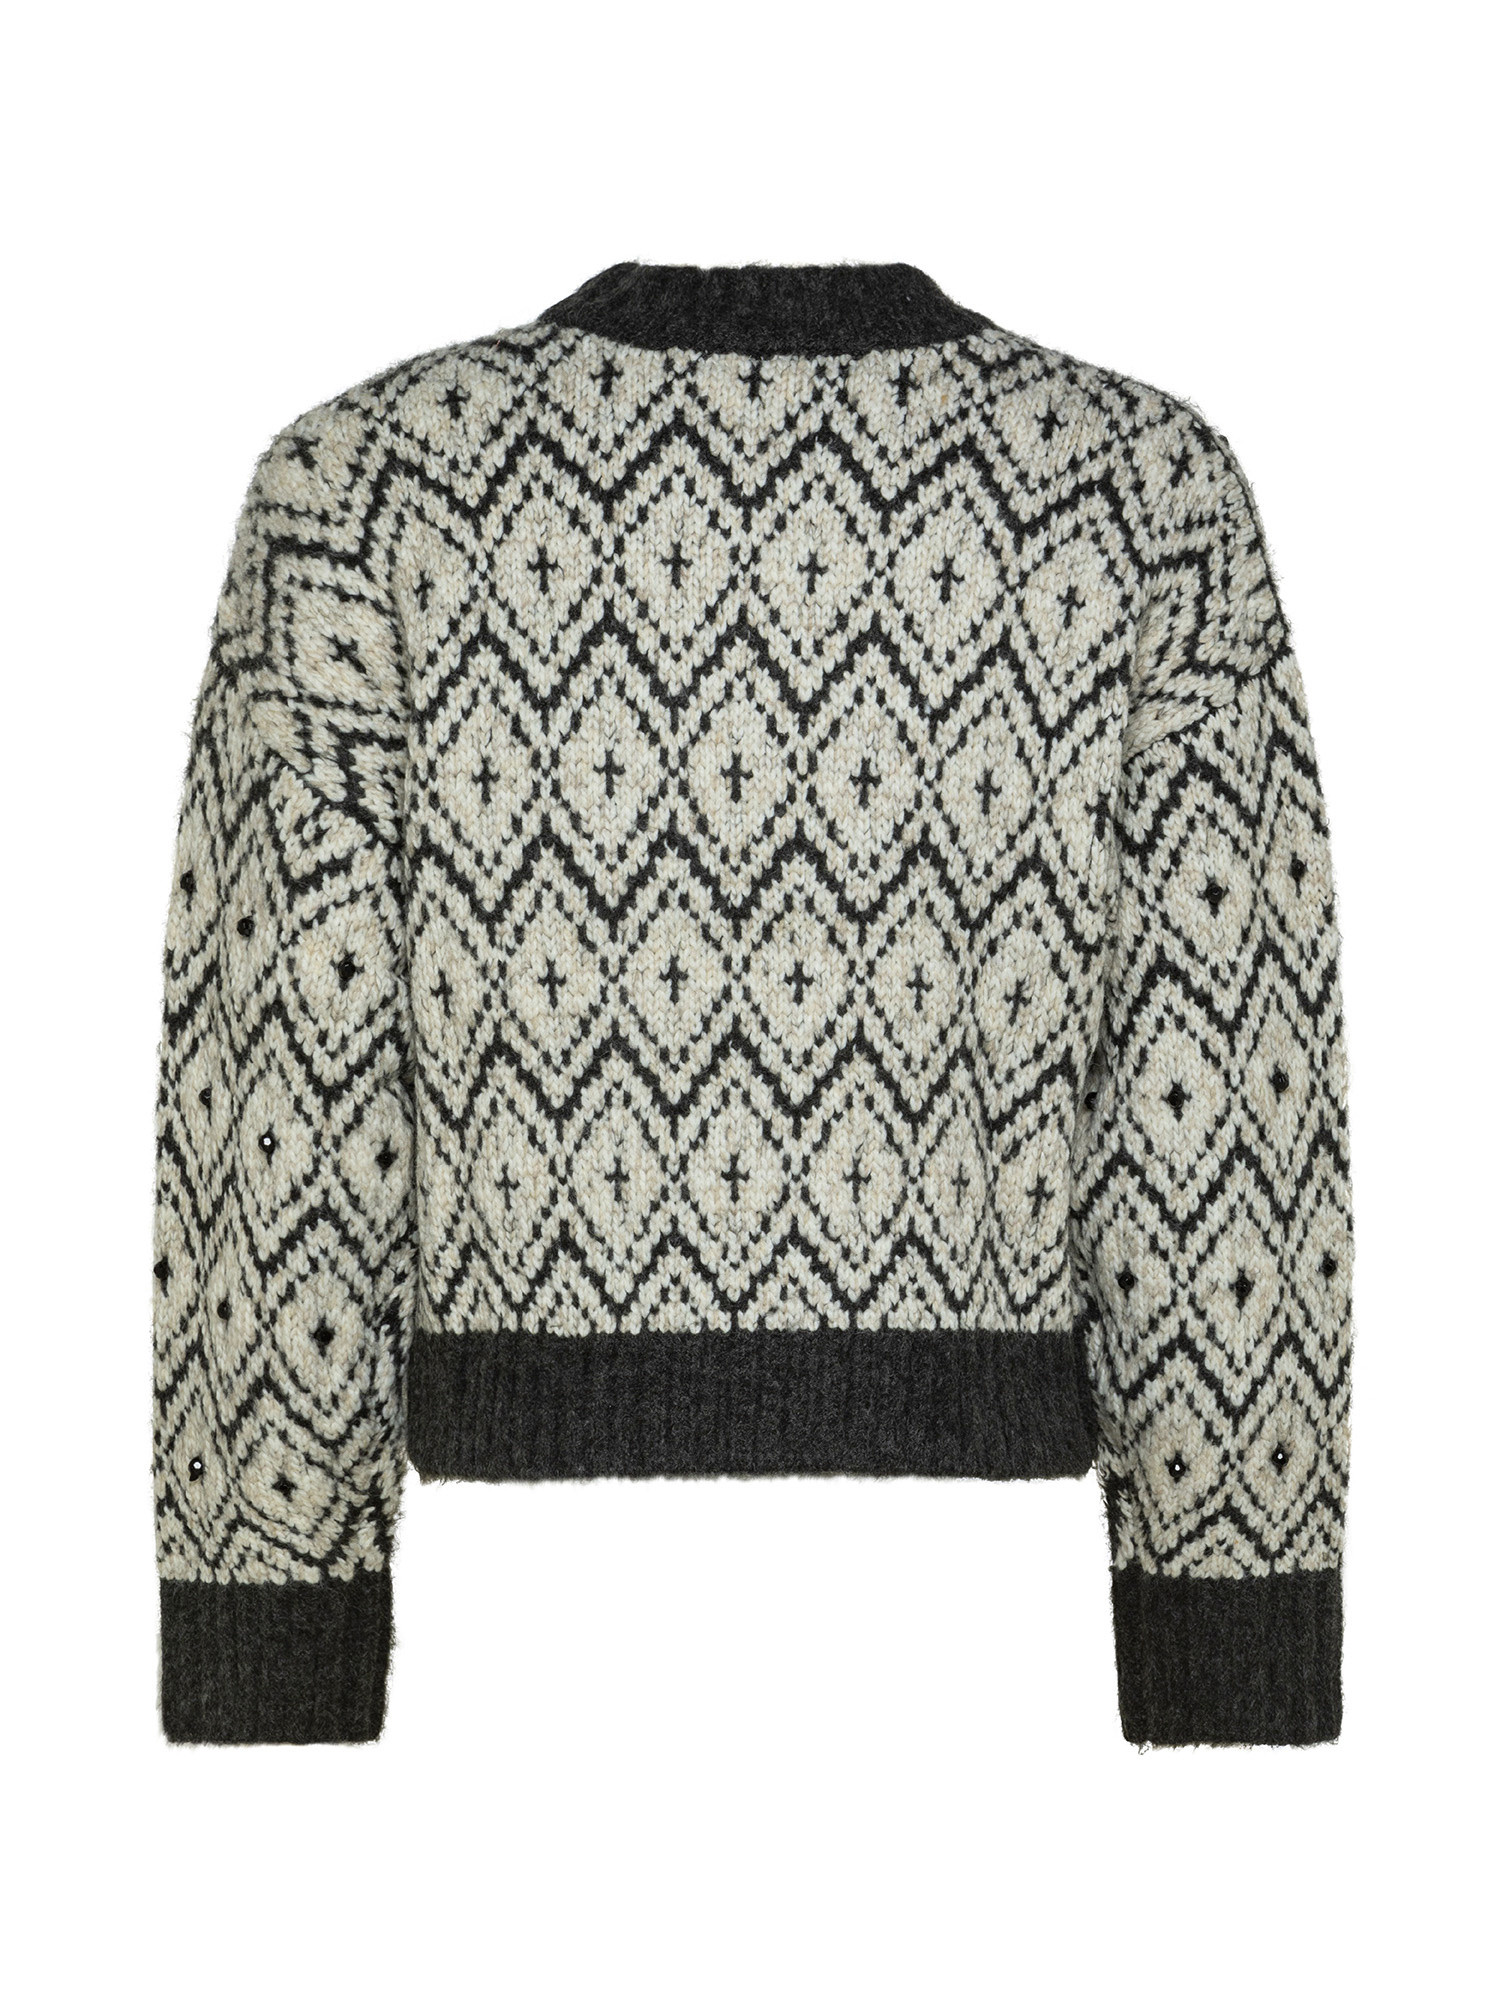 Bexa jacquard pullover, Multicolor, large image number 1